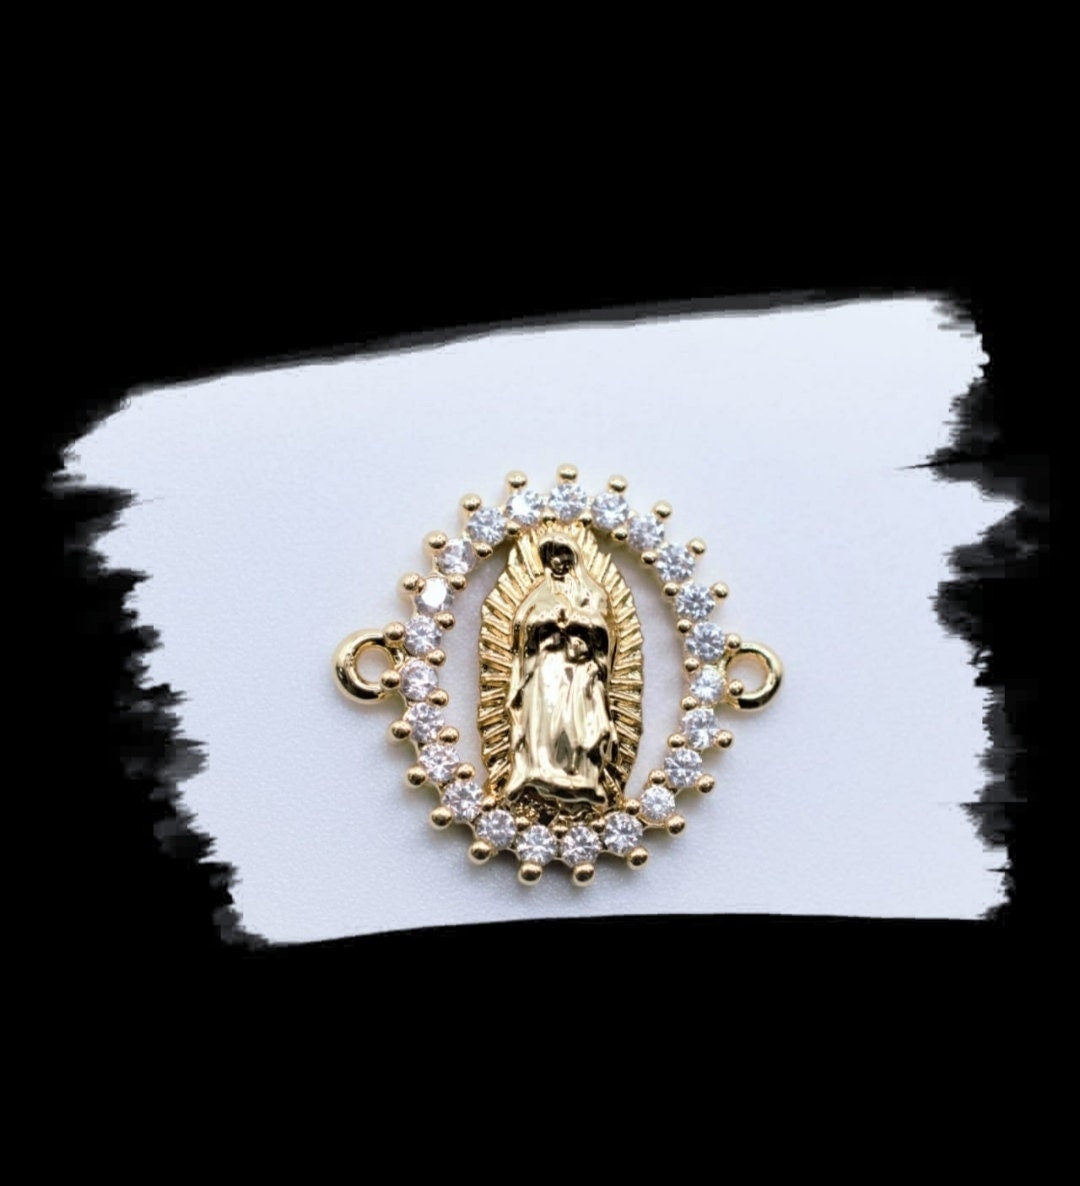 Virgen de Guadalupe-Virgin Guadalupe Connector 18K Gold Plated Size 17x16mm Micro Pave Beads Charm with Clear CZ Cubic Zirconia